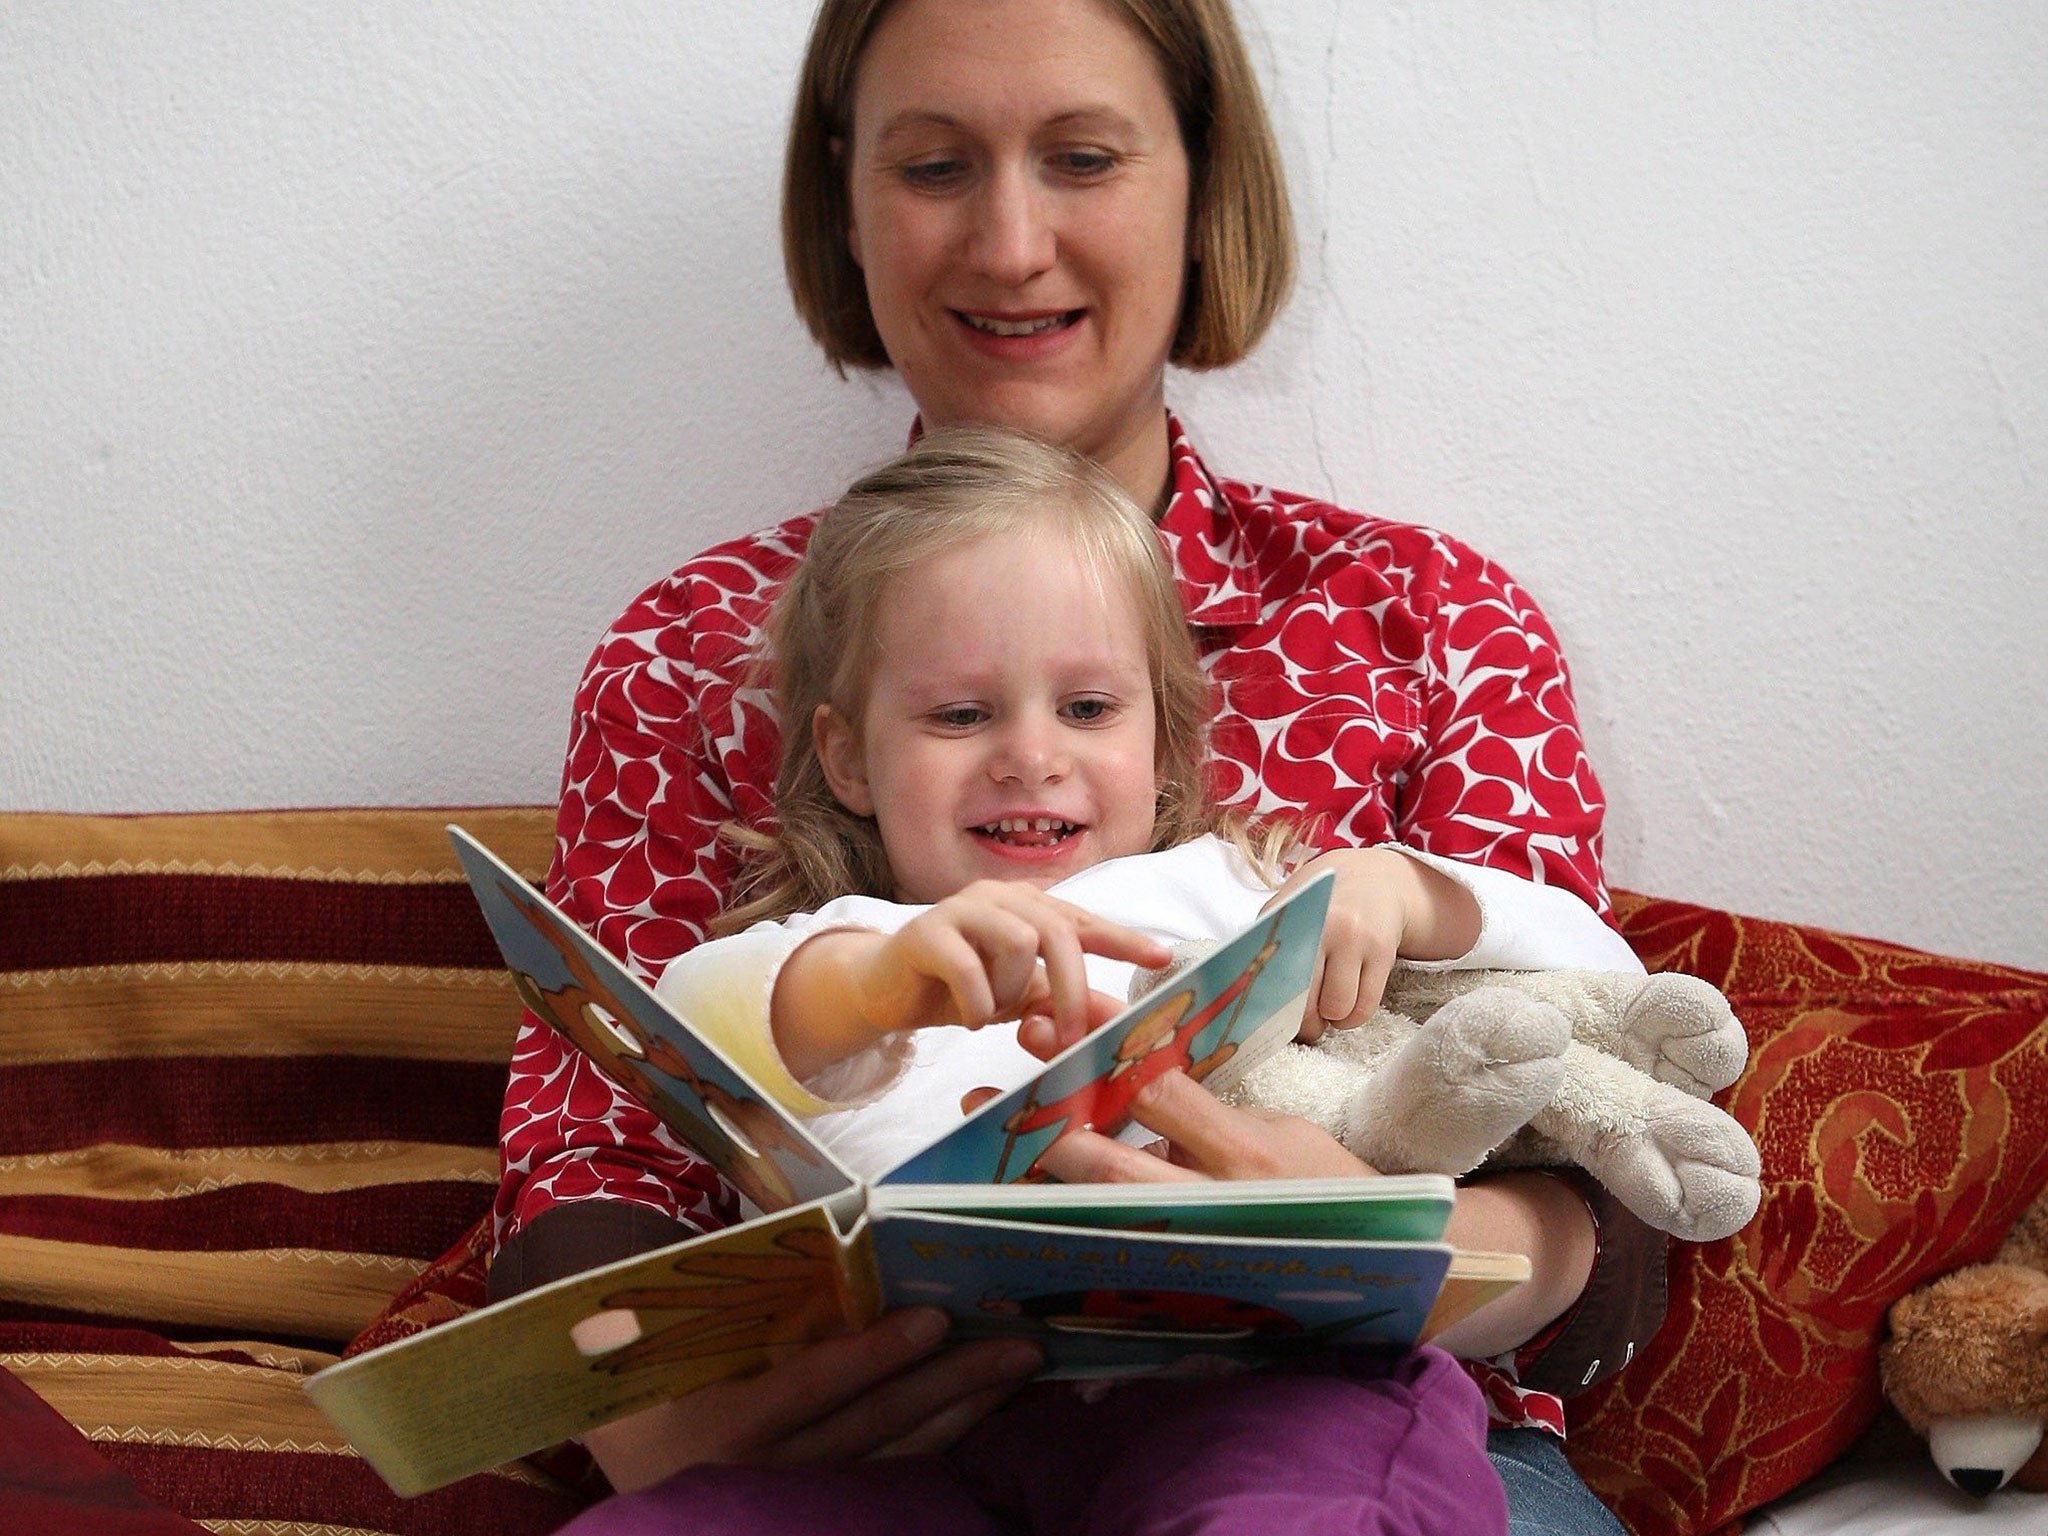 Reading aloud to your children and talking about pictures and words in age-appropriate books can strengthen language skills, literacy development, and parent-child relationships